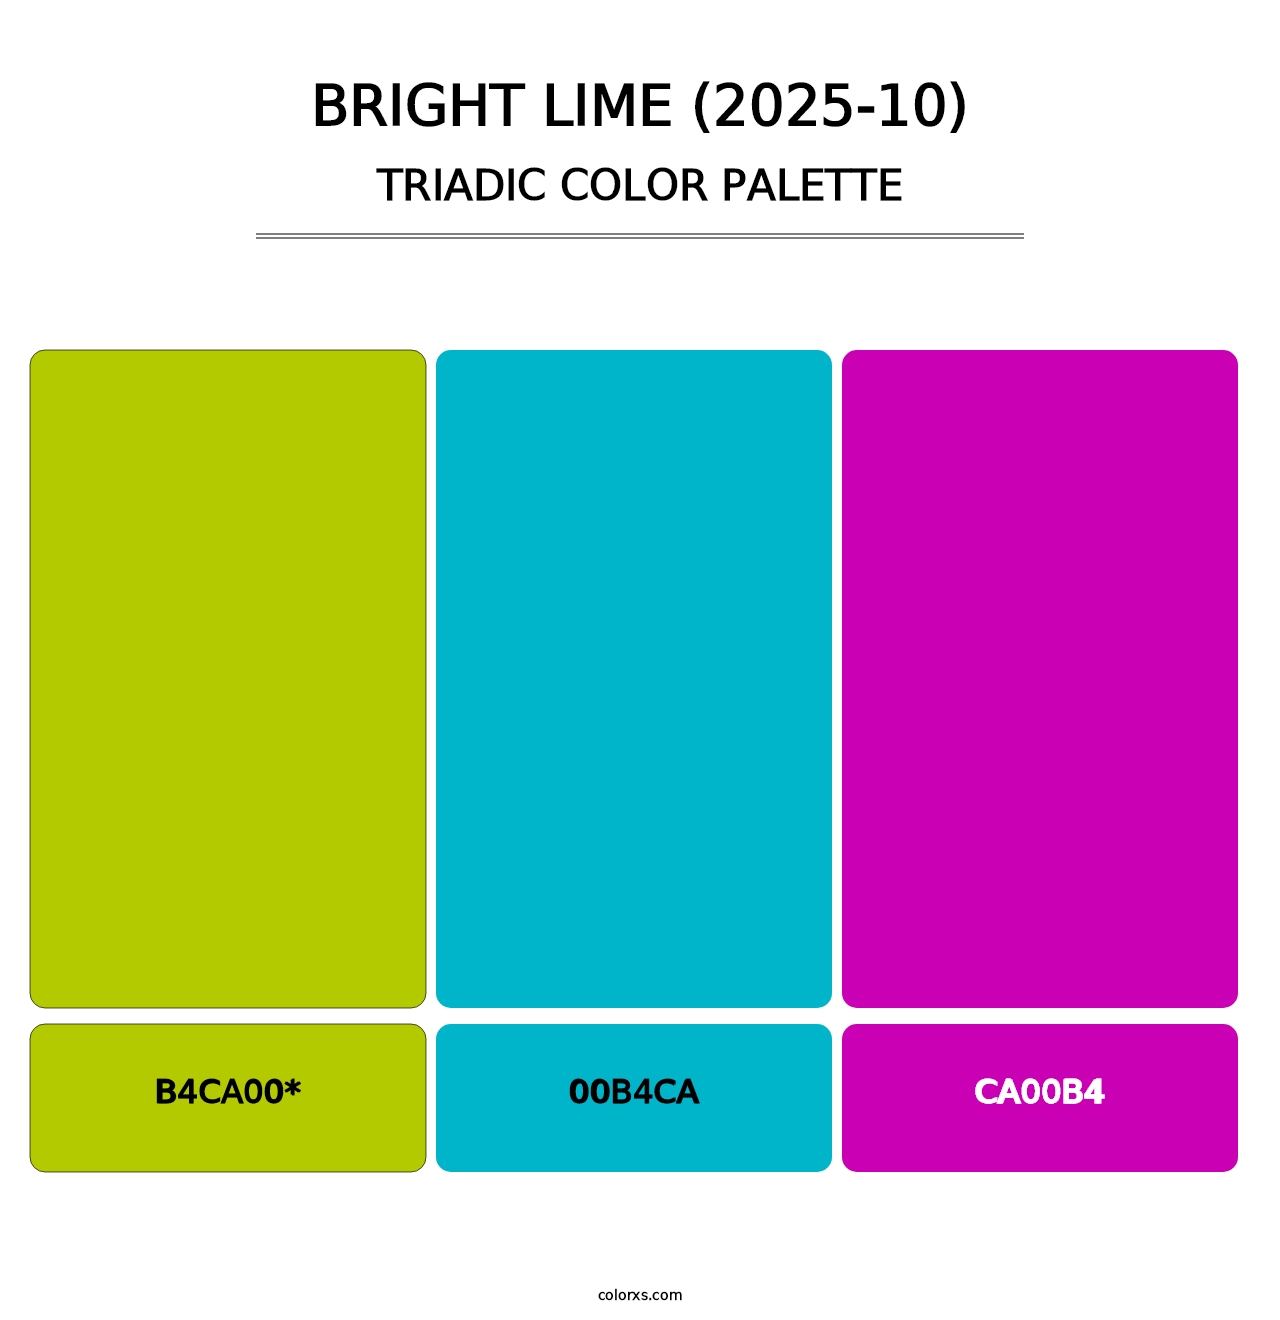 Bright Lime (2025-10) - Triadic Color Palette